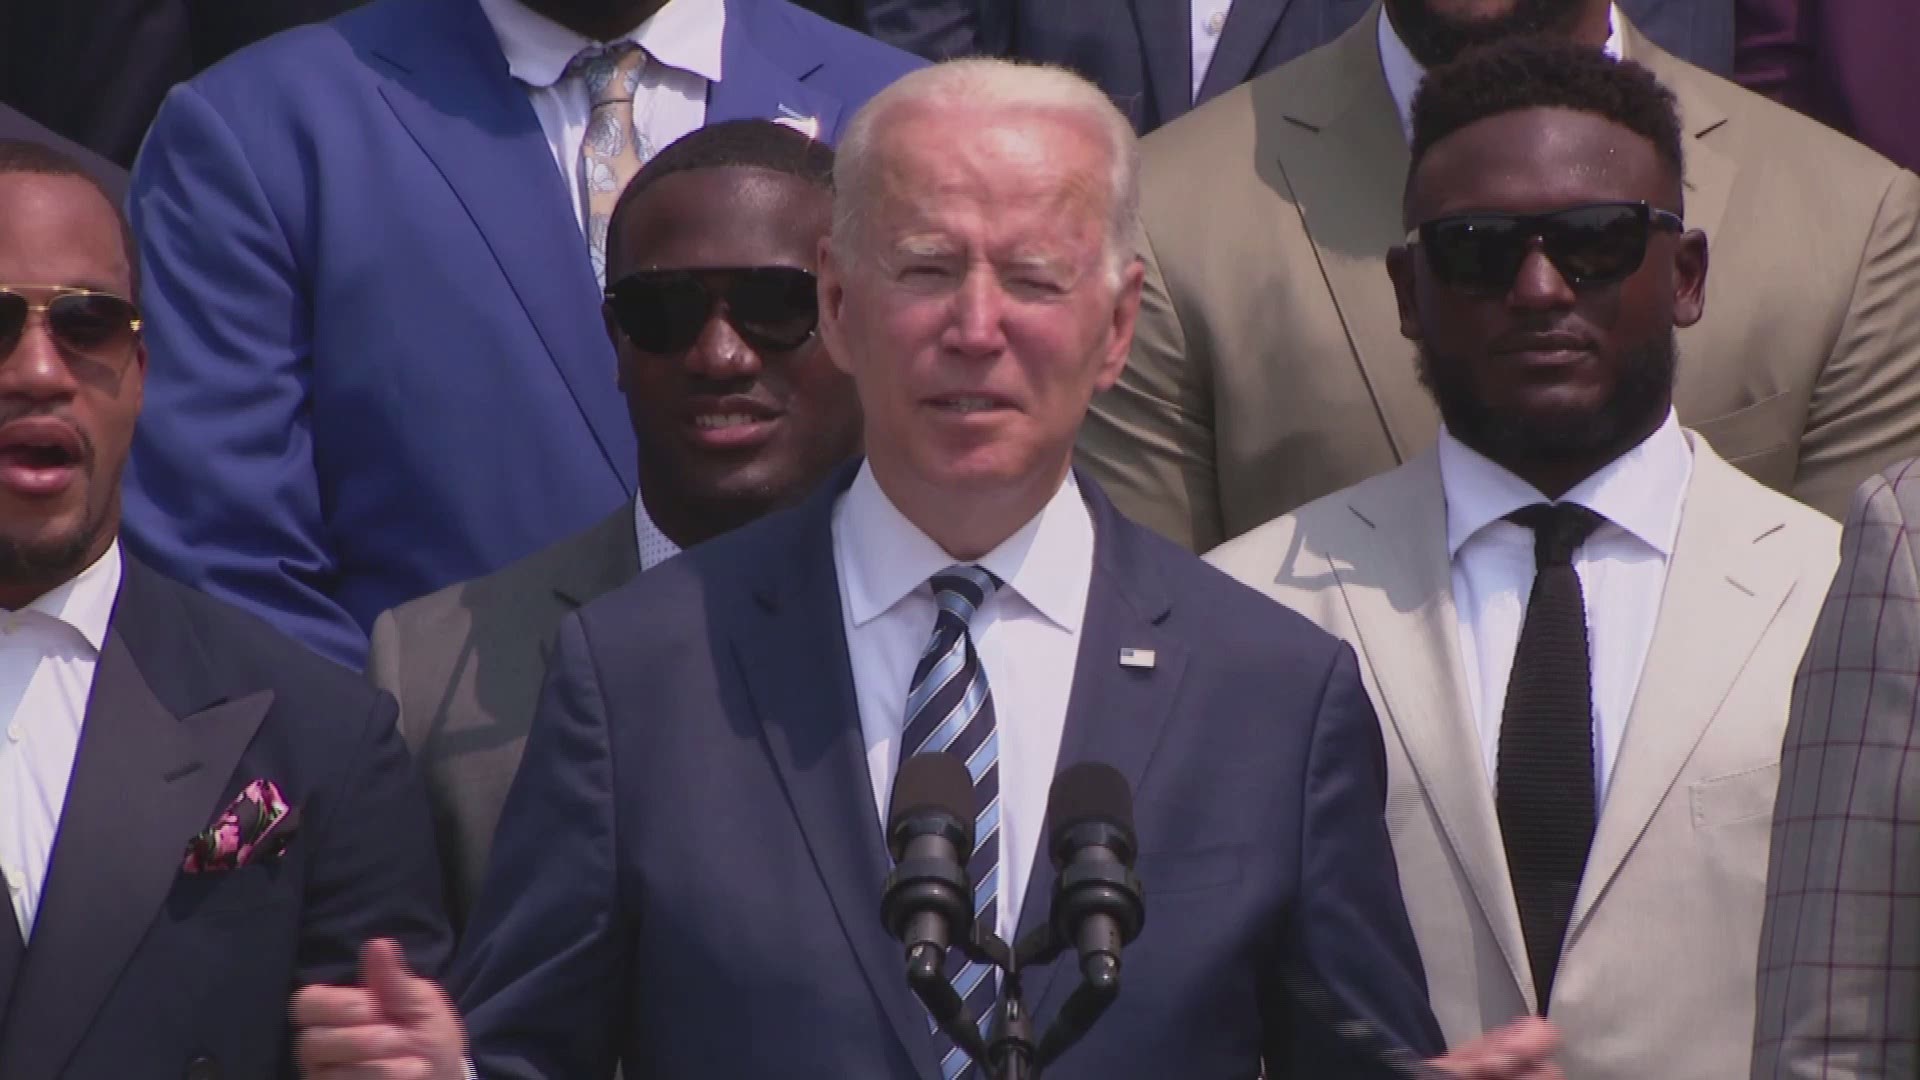 President Biden highlighted the Buccaneers' off-the-field accomplishments, including using Raymond James Stadium as a vaccination site.